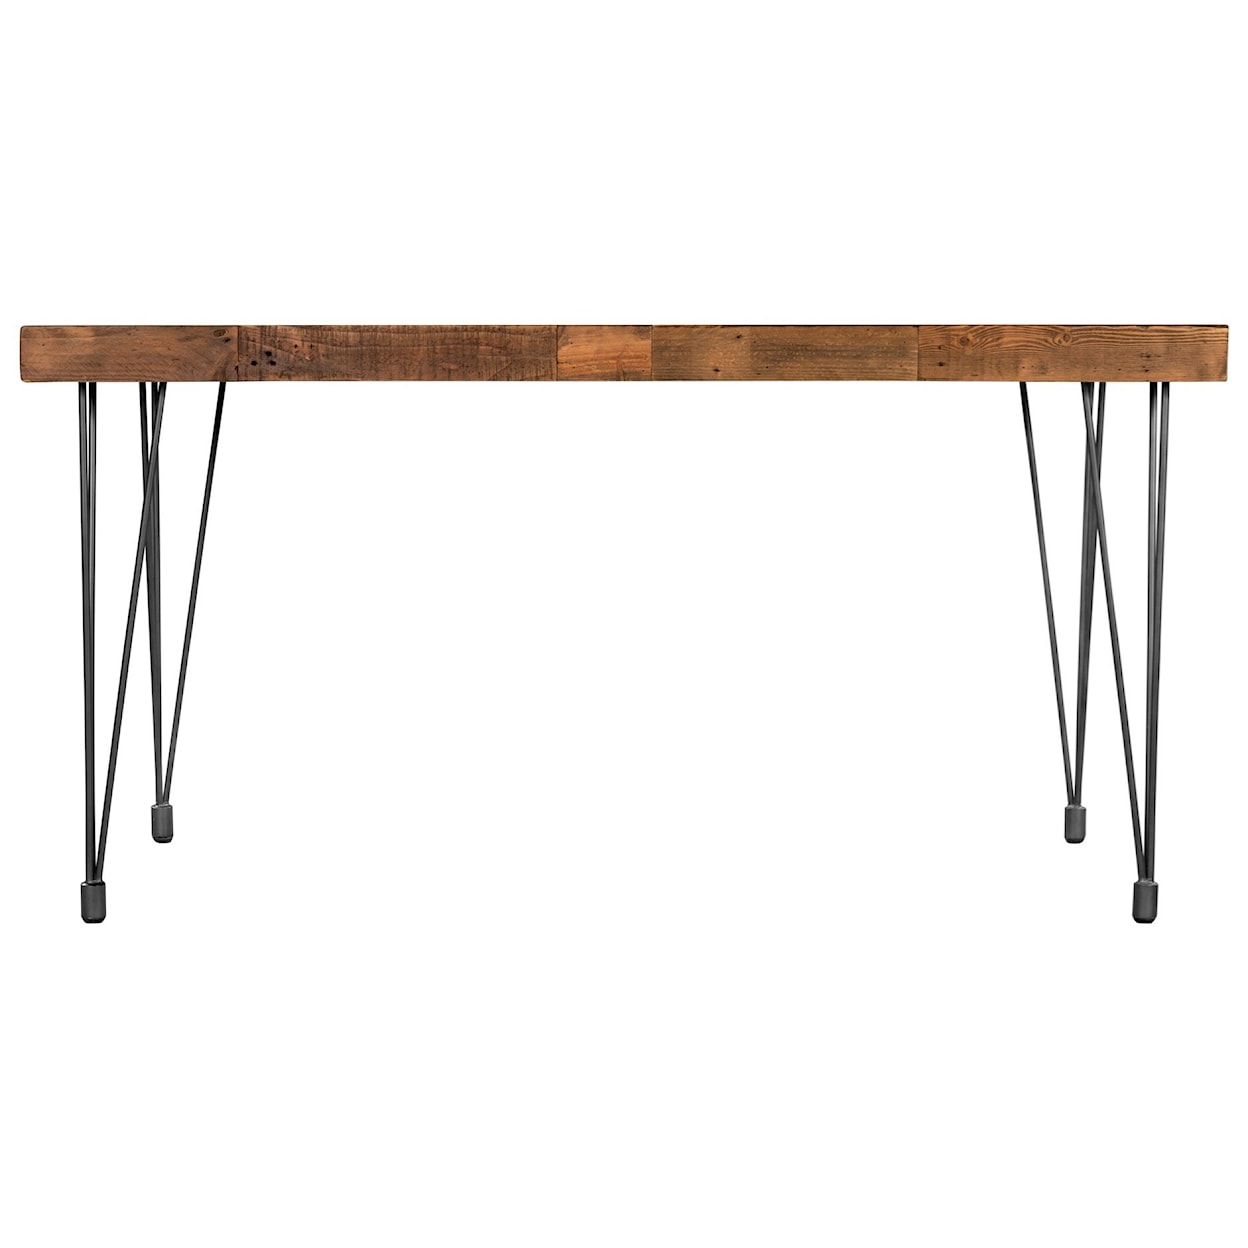 Moe's Home Collection Boneta Recycled Pine Dining Table